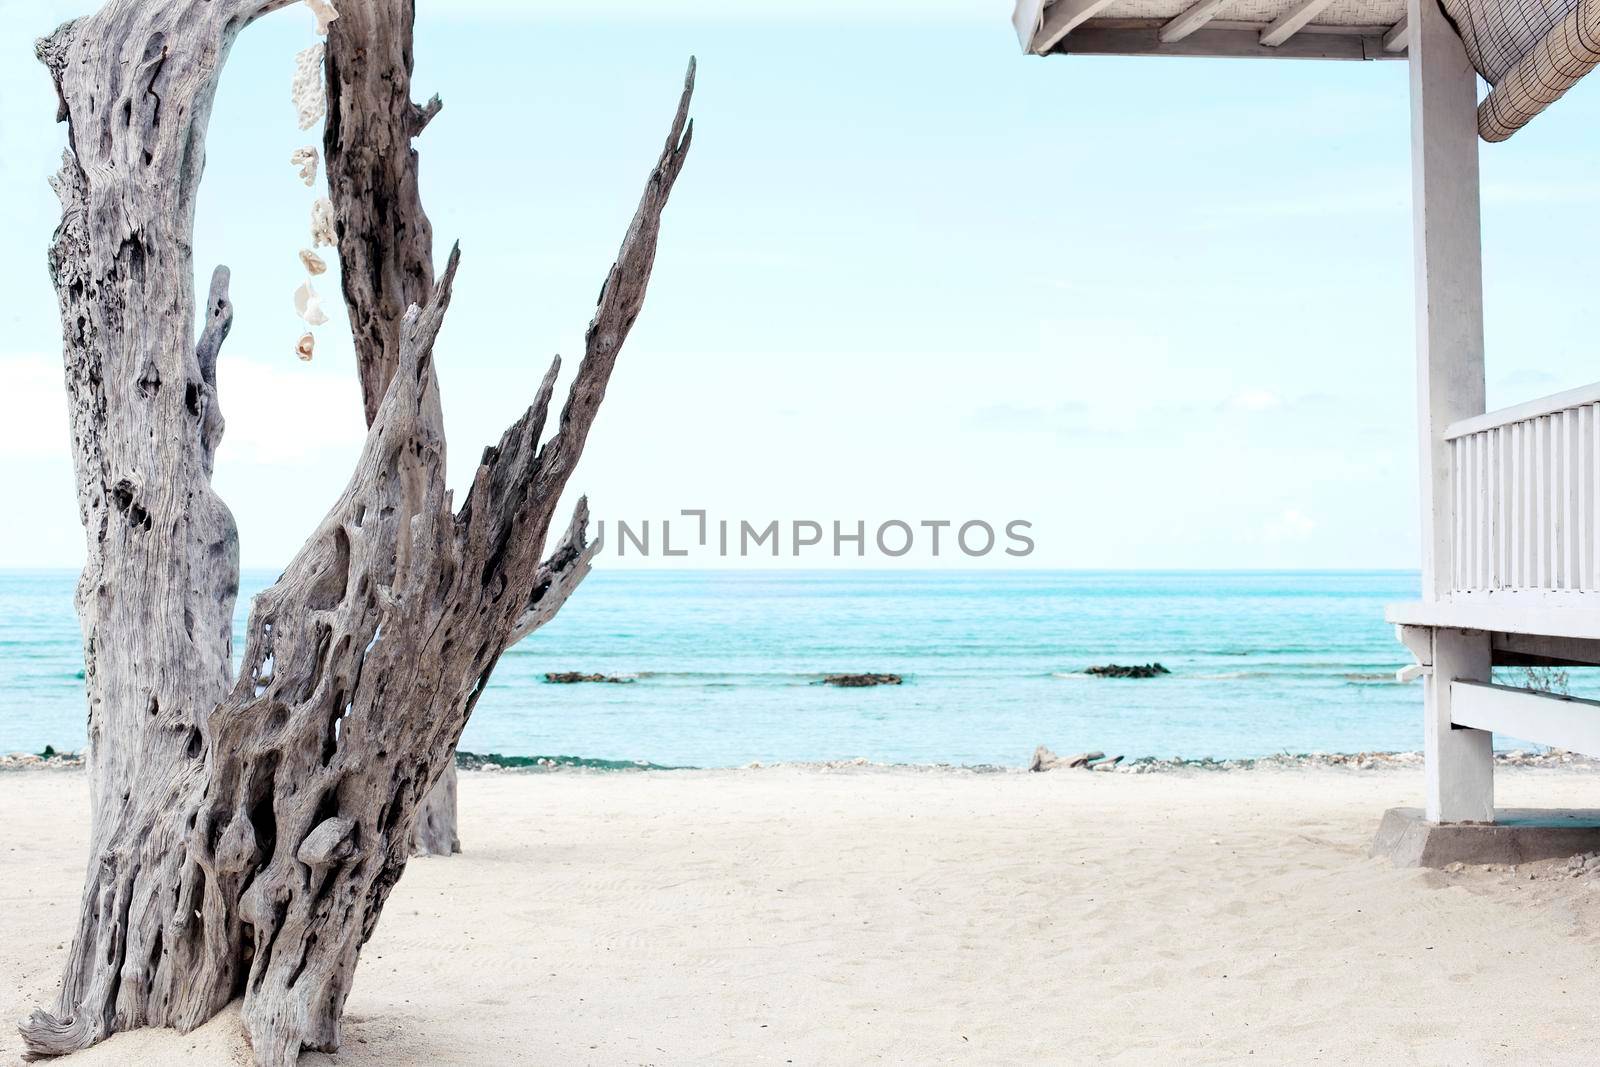 White wooden shelter and dead tree from the sun on the beach in Bali. Stock image.